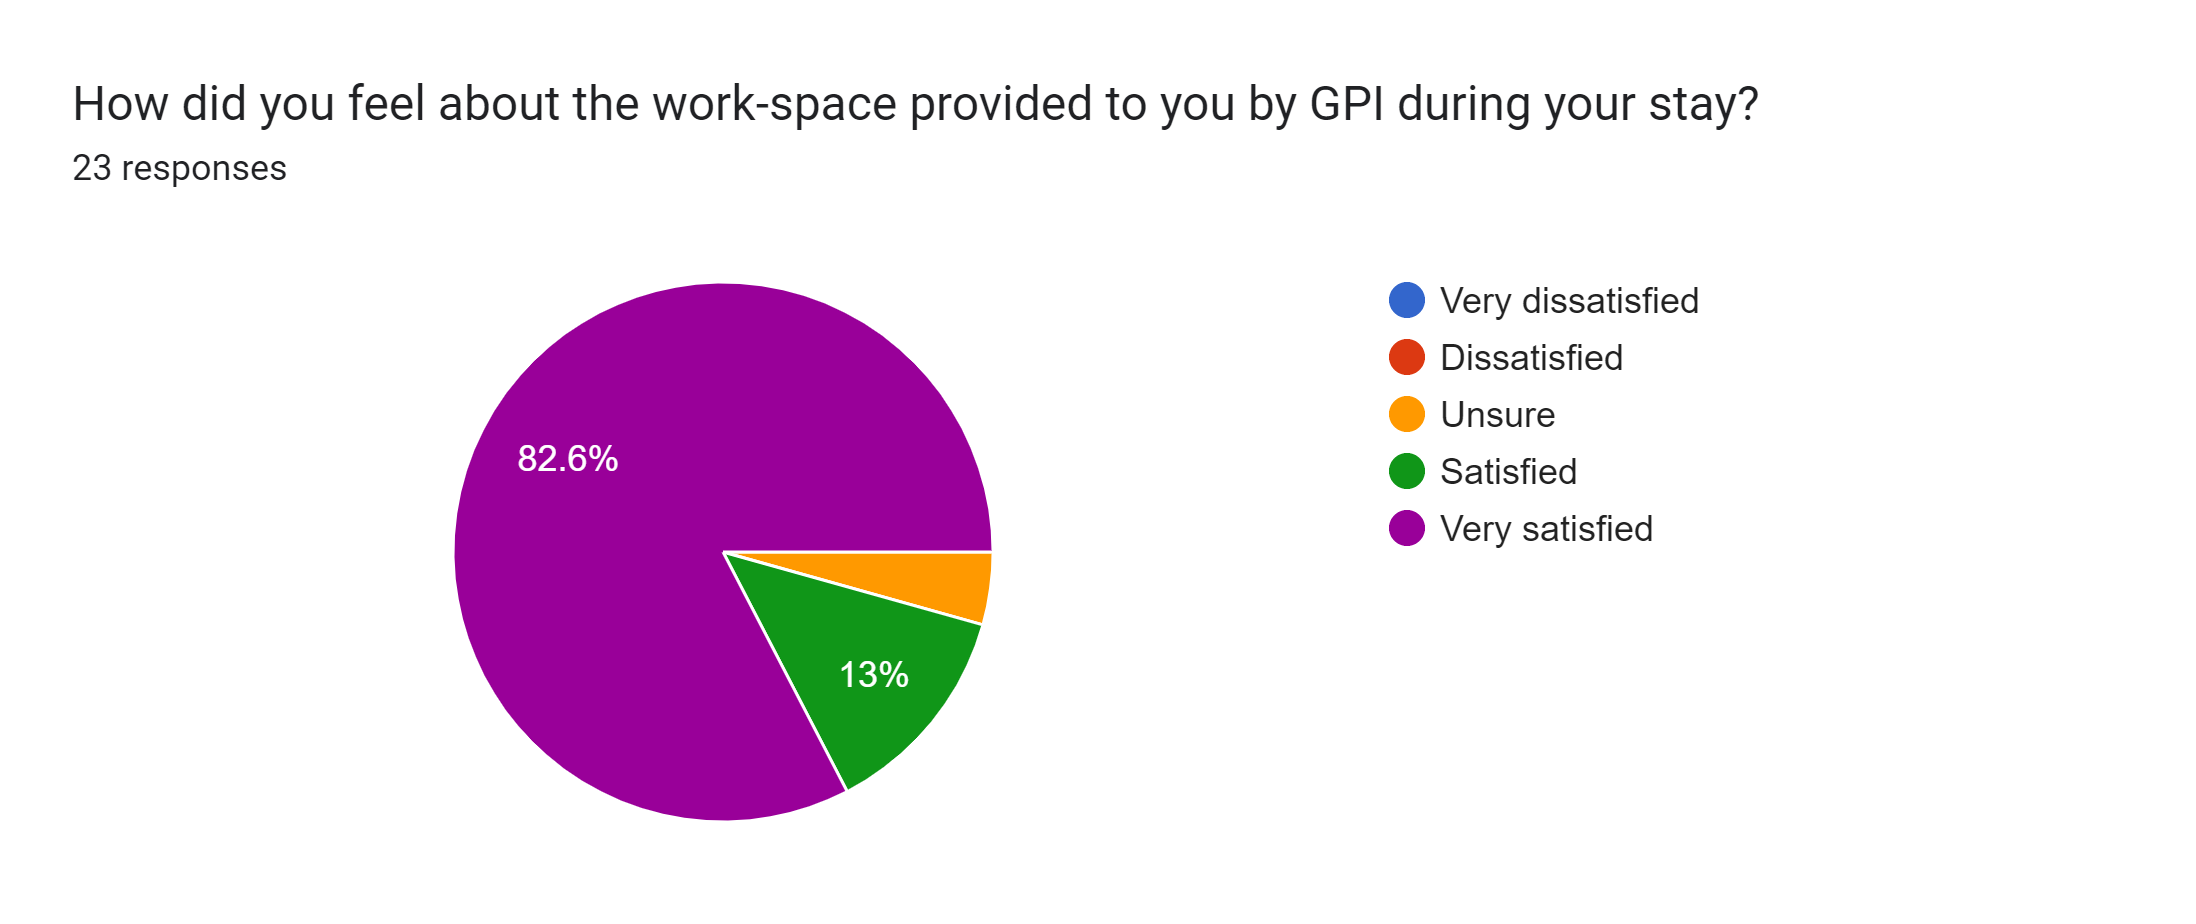 Forms response chart. Question title: How did you feel about the work-space provided to you by GPI during your stay?. Number of responses: 23 responses.